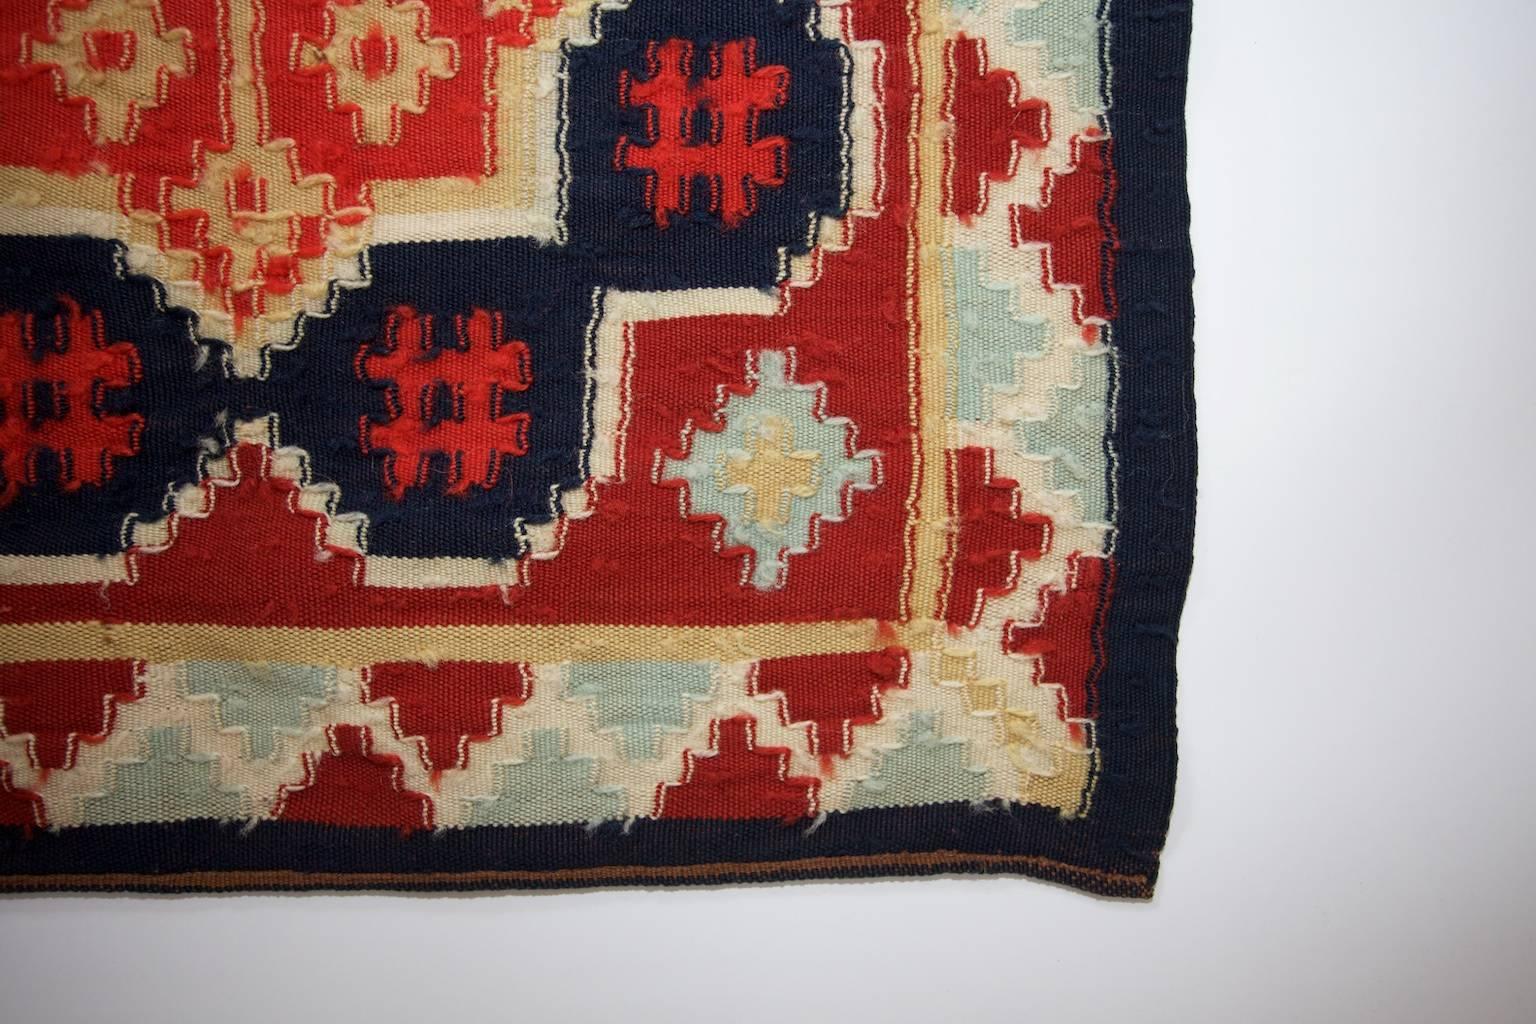 A beautiful Swedish Jynnen (seat or pillow cover), 19th-20th century, linen and wool, Röllakan technique. Somewhat sunbleached. Probably from the province och Skåne in Southern Sweden.